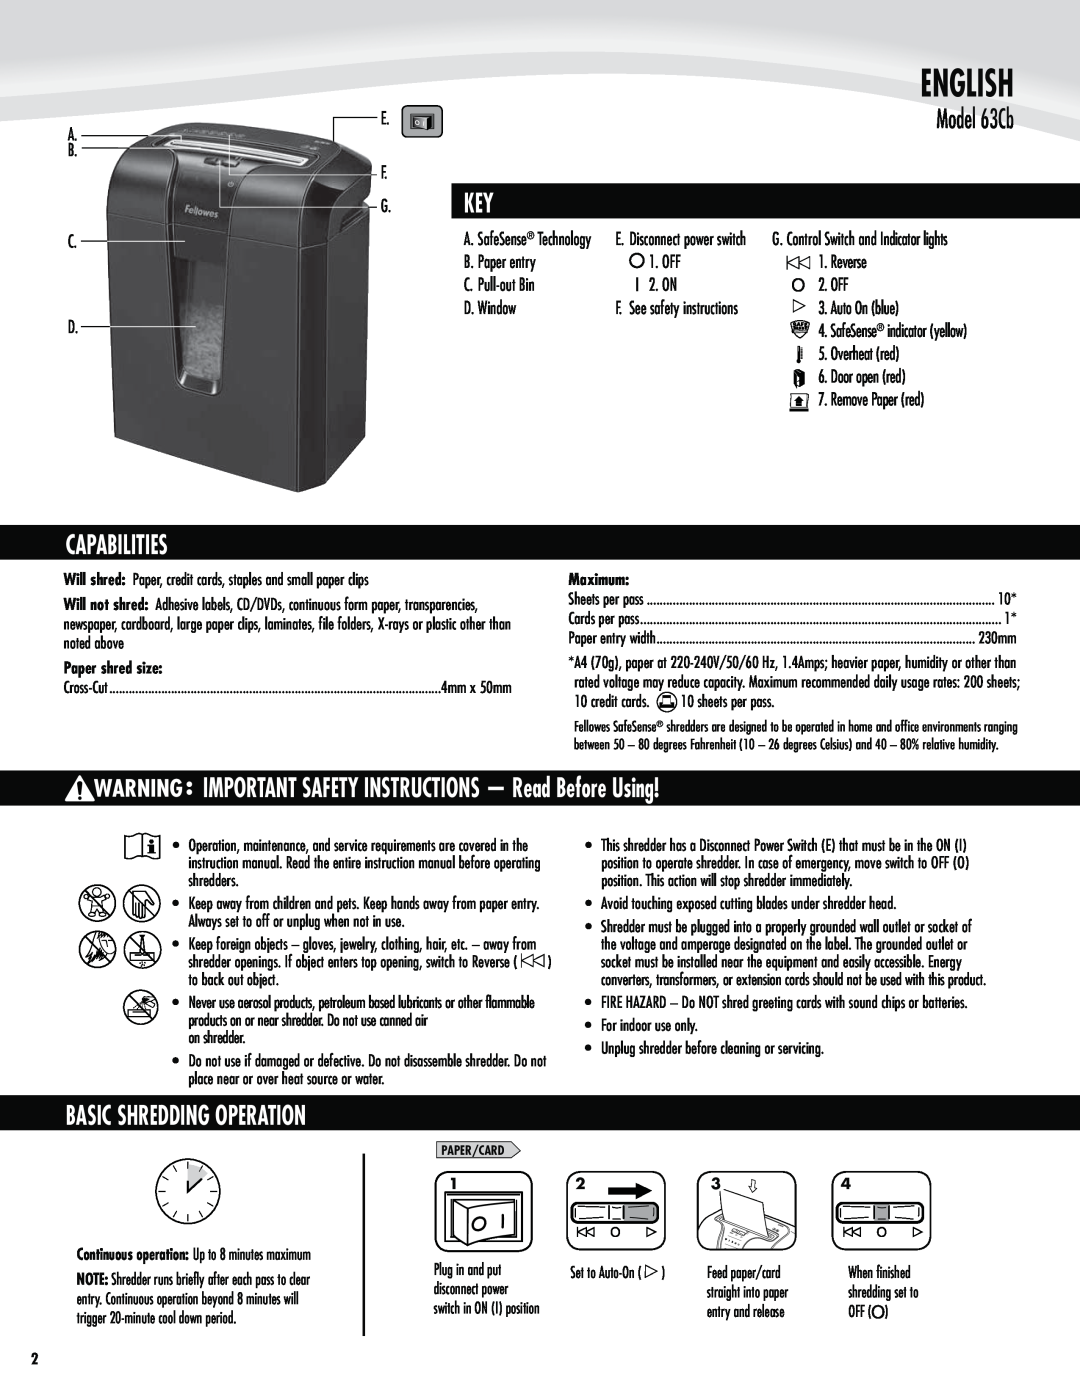 Fellowes 63cb manual English, Model 63Cb, Capabilities, IMPORTANT SAFETY INSTRUCTIONS - Read Before Using 